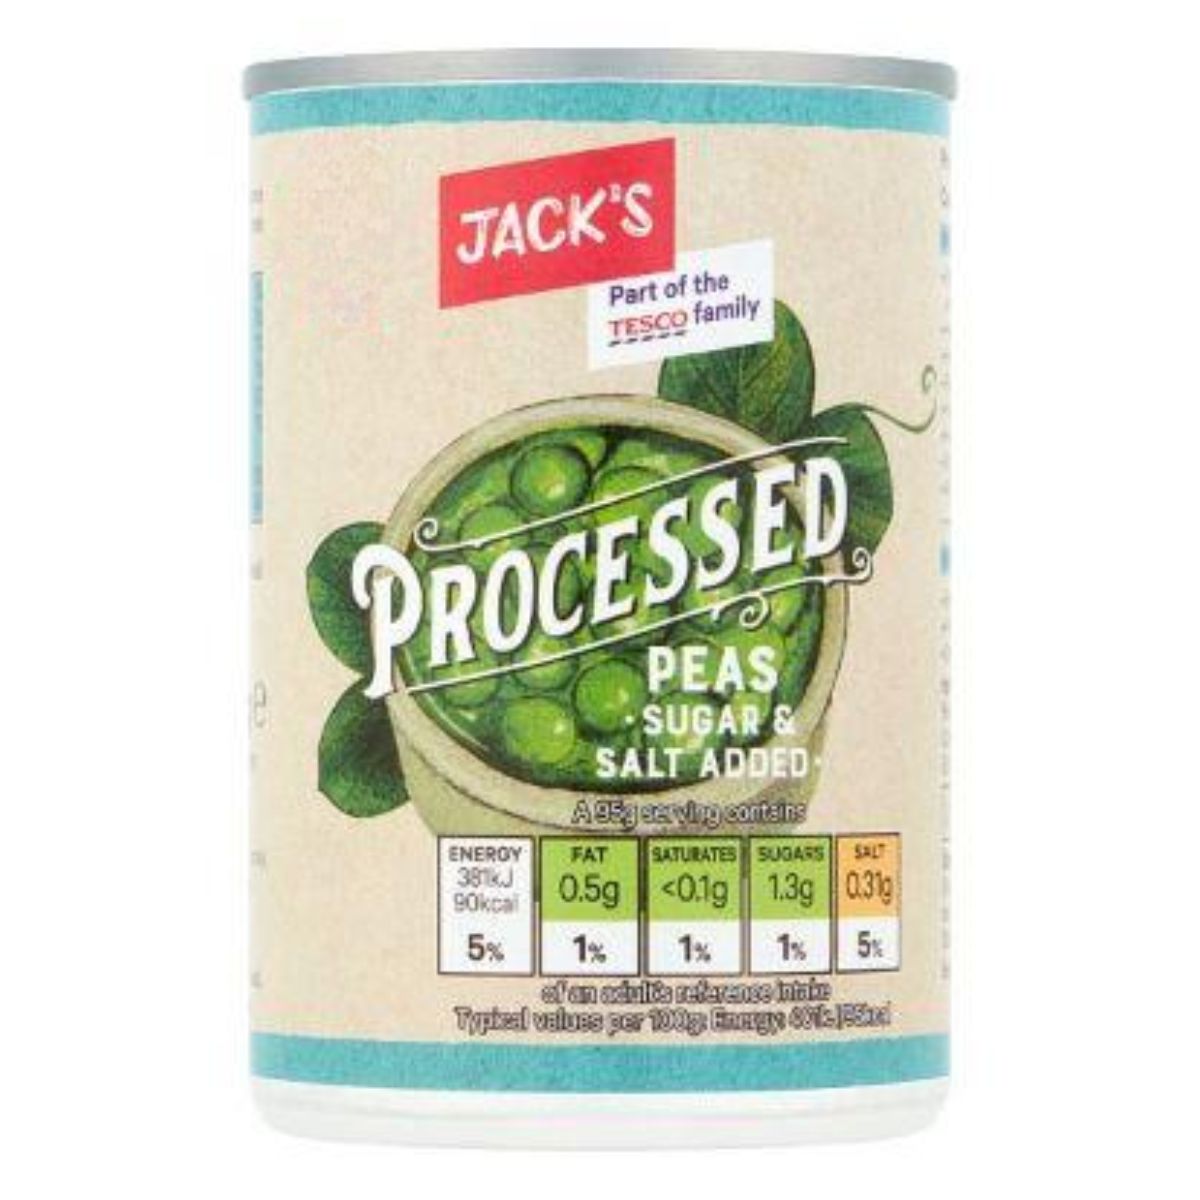 A can of Jacks - Processed Peas - 300g with sugar and salt added.